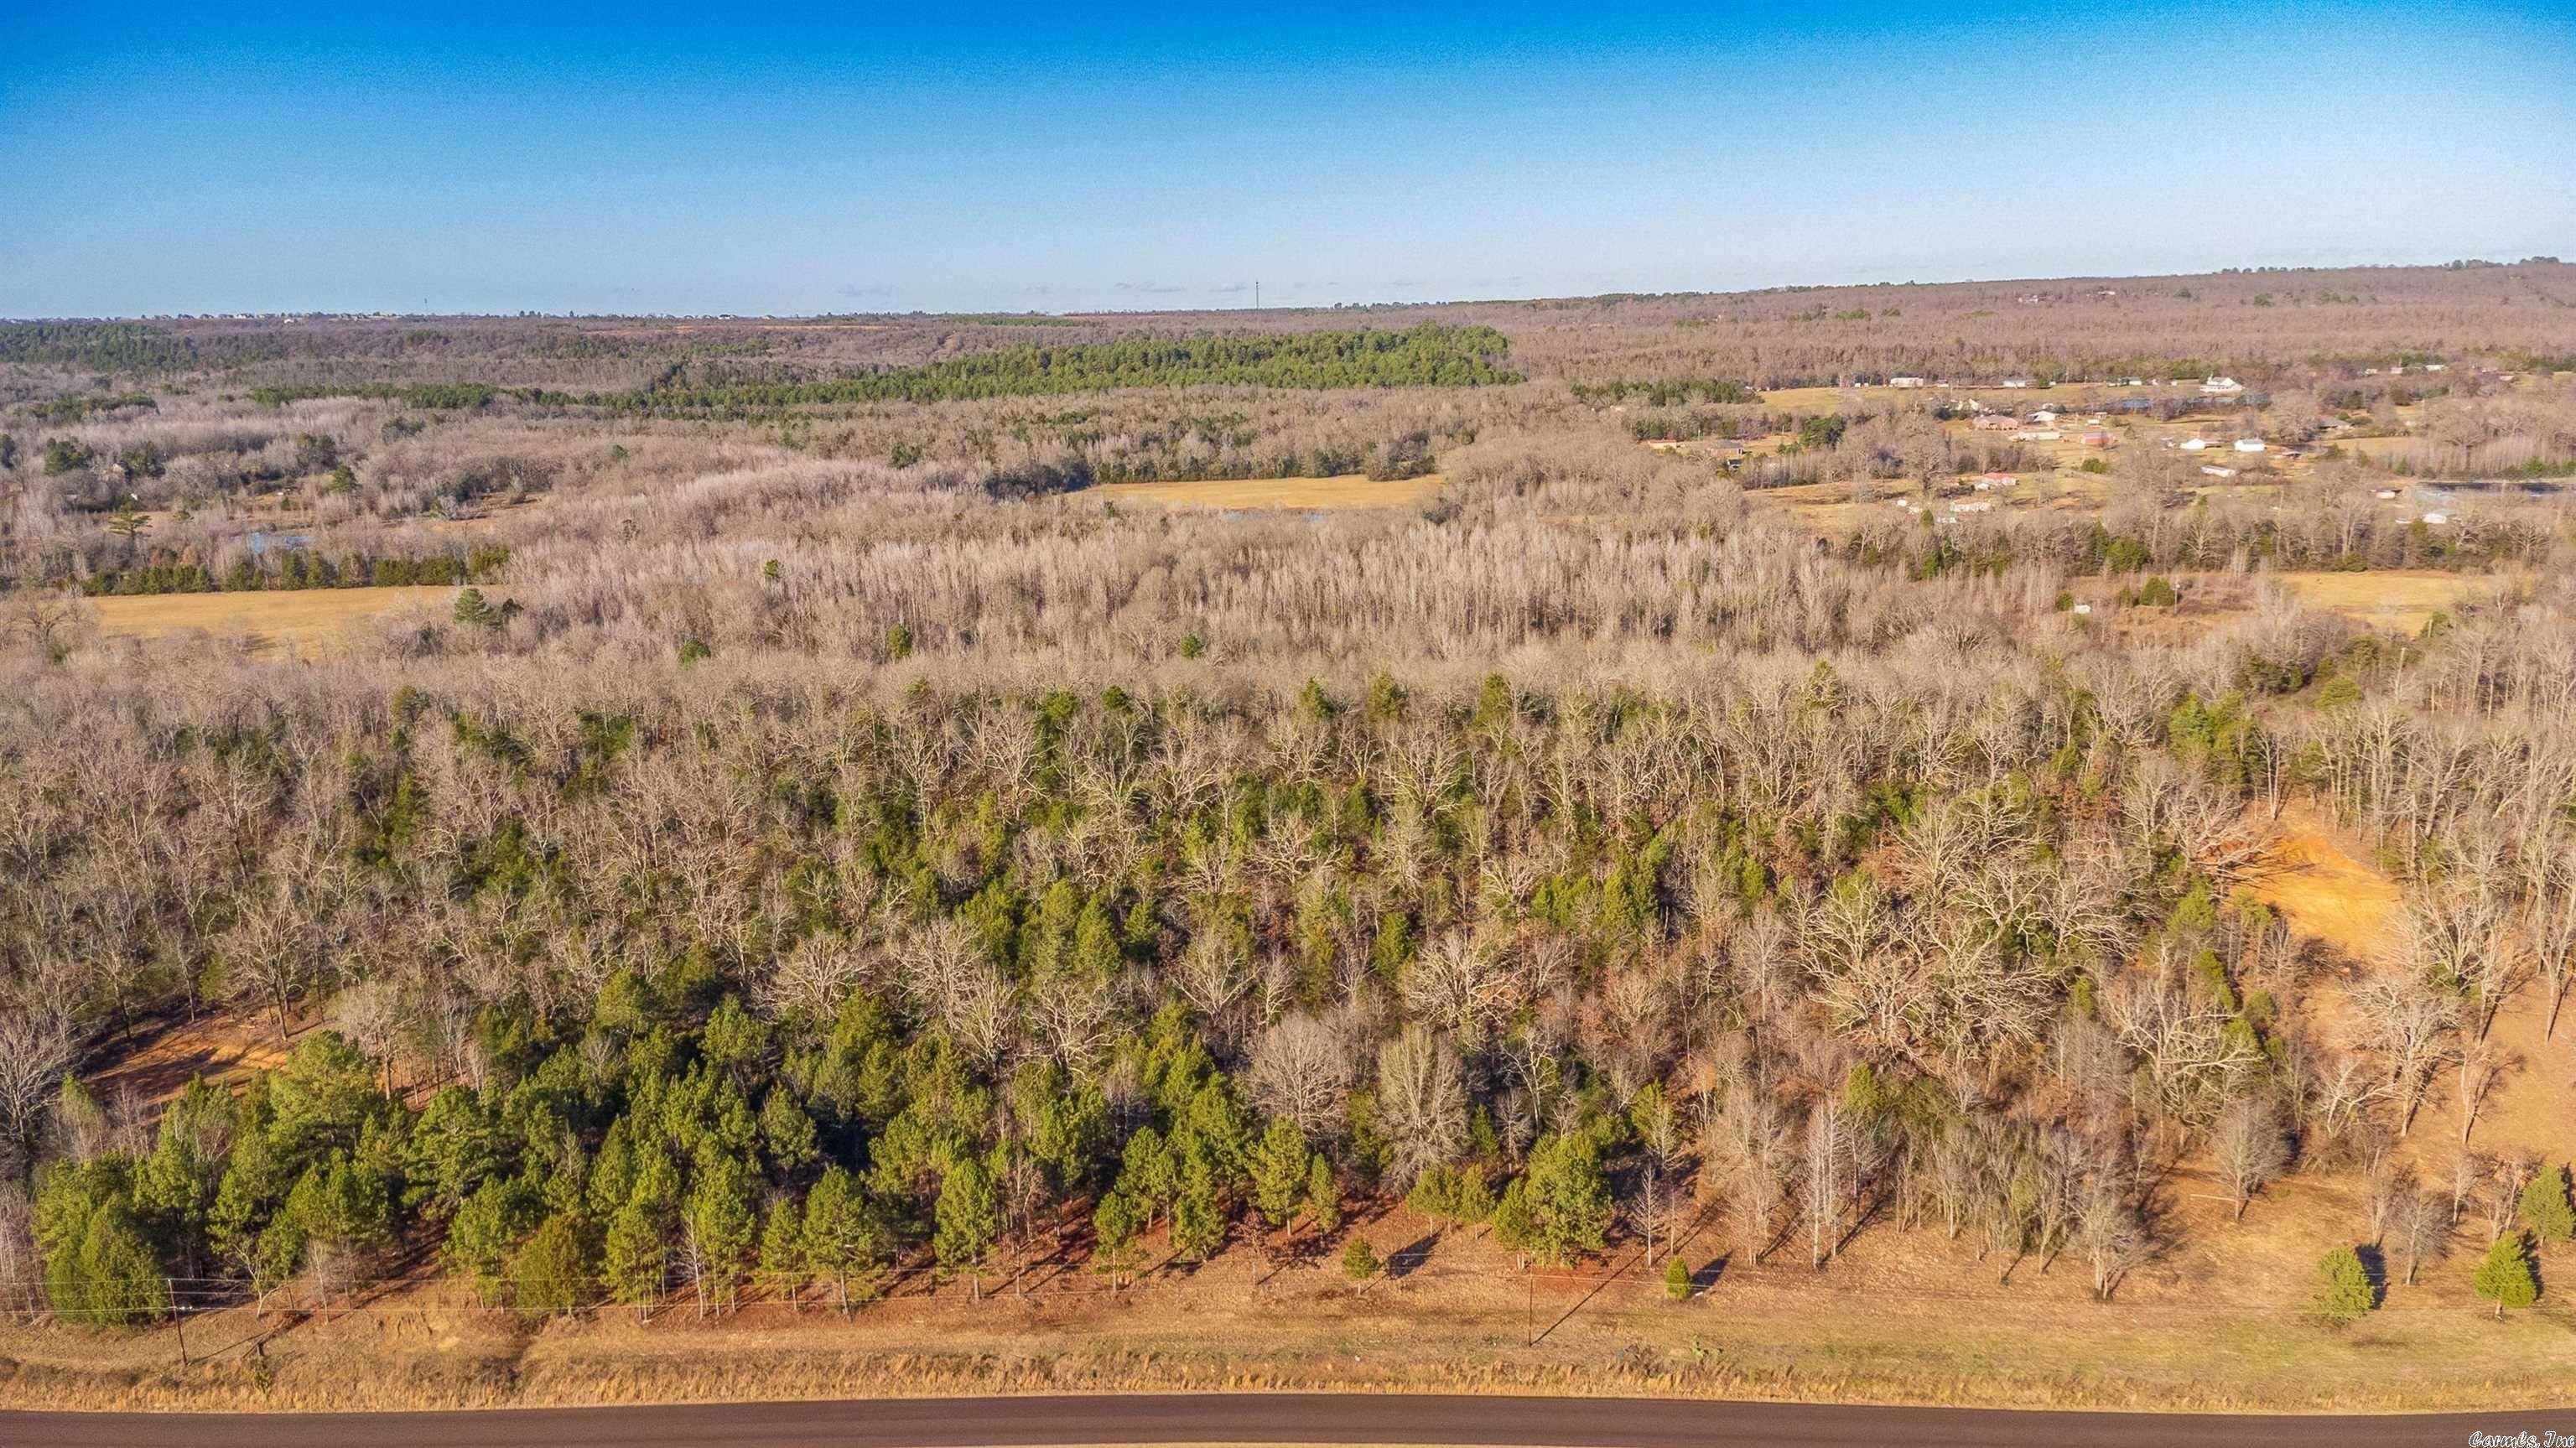 View Cabot, AR 72023 land